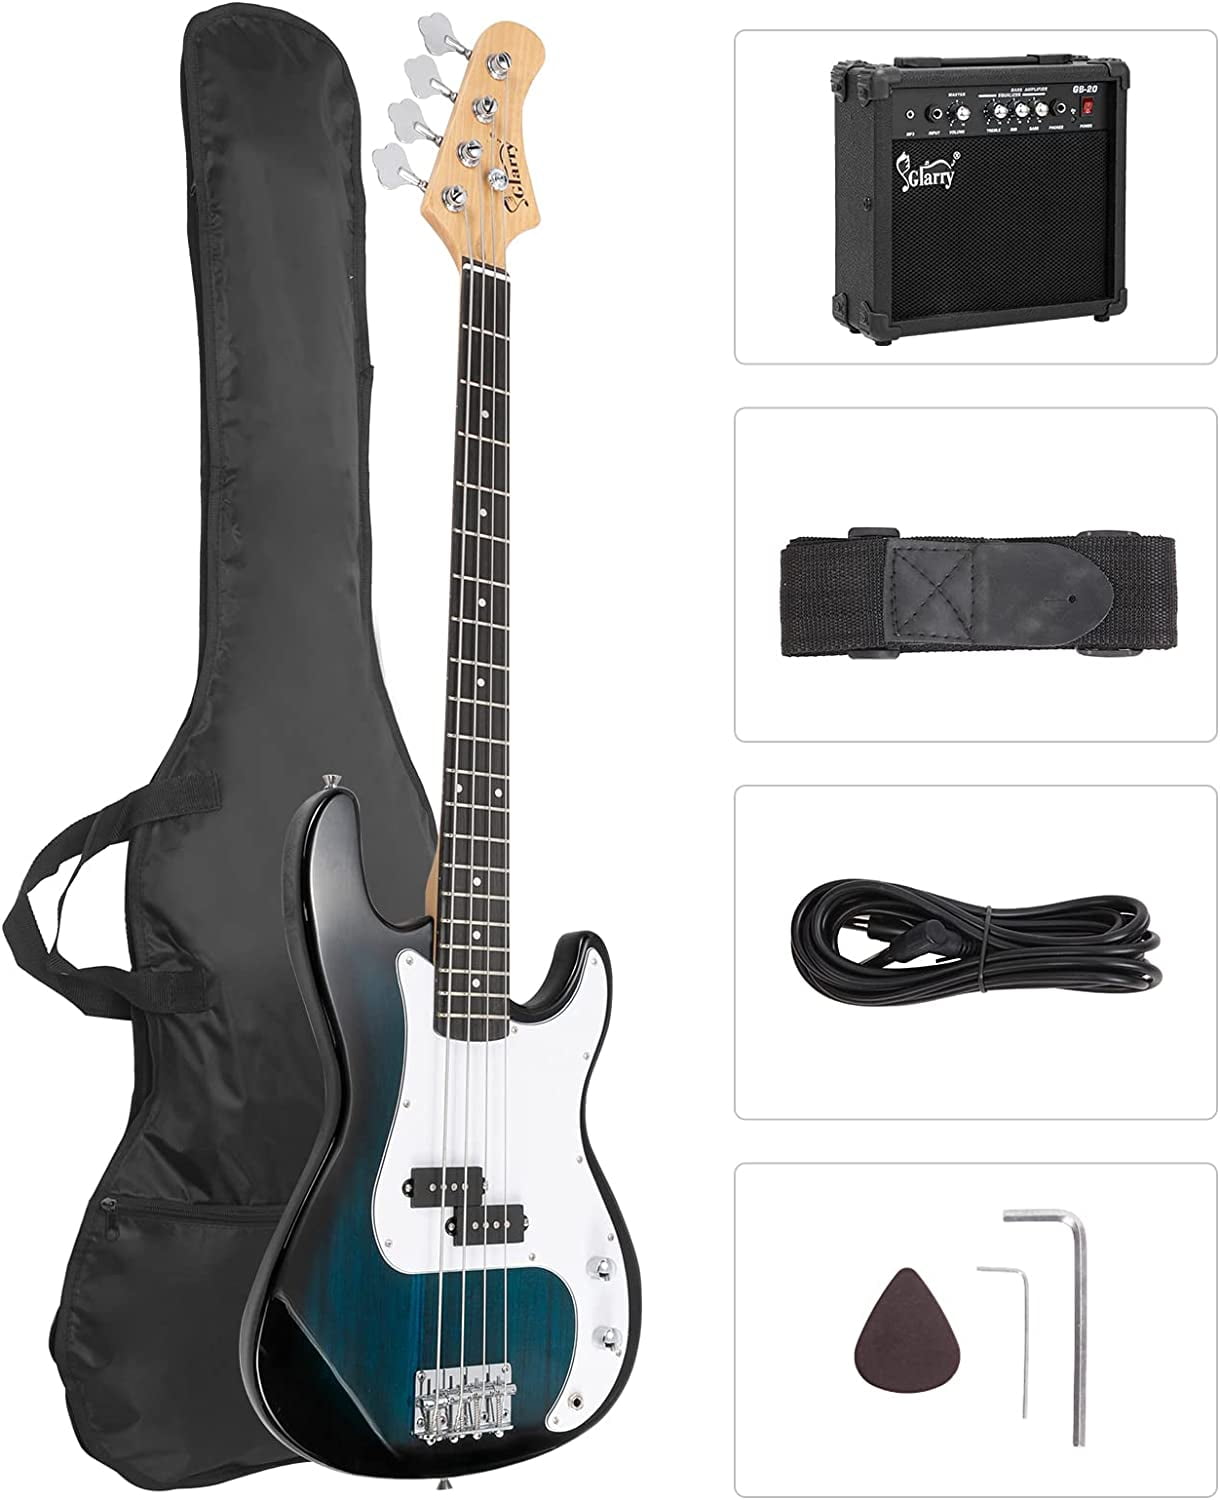 GLARRY Full Size Electric Bass Guitar with 20W AMP, 4 String